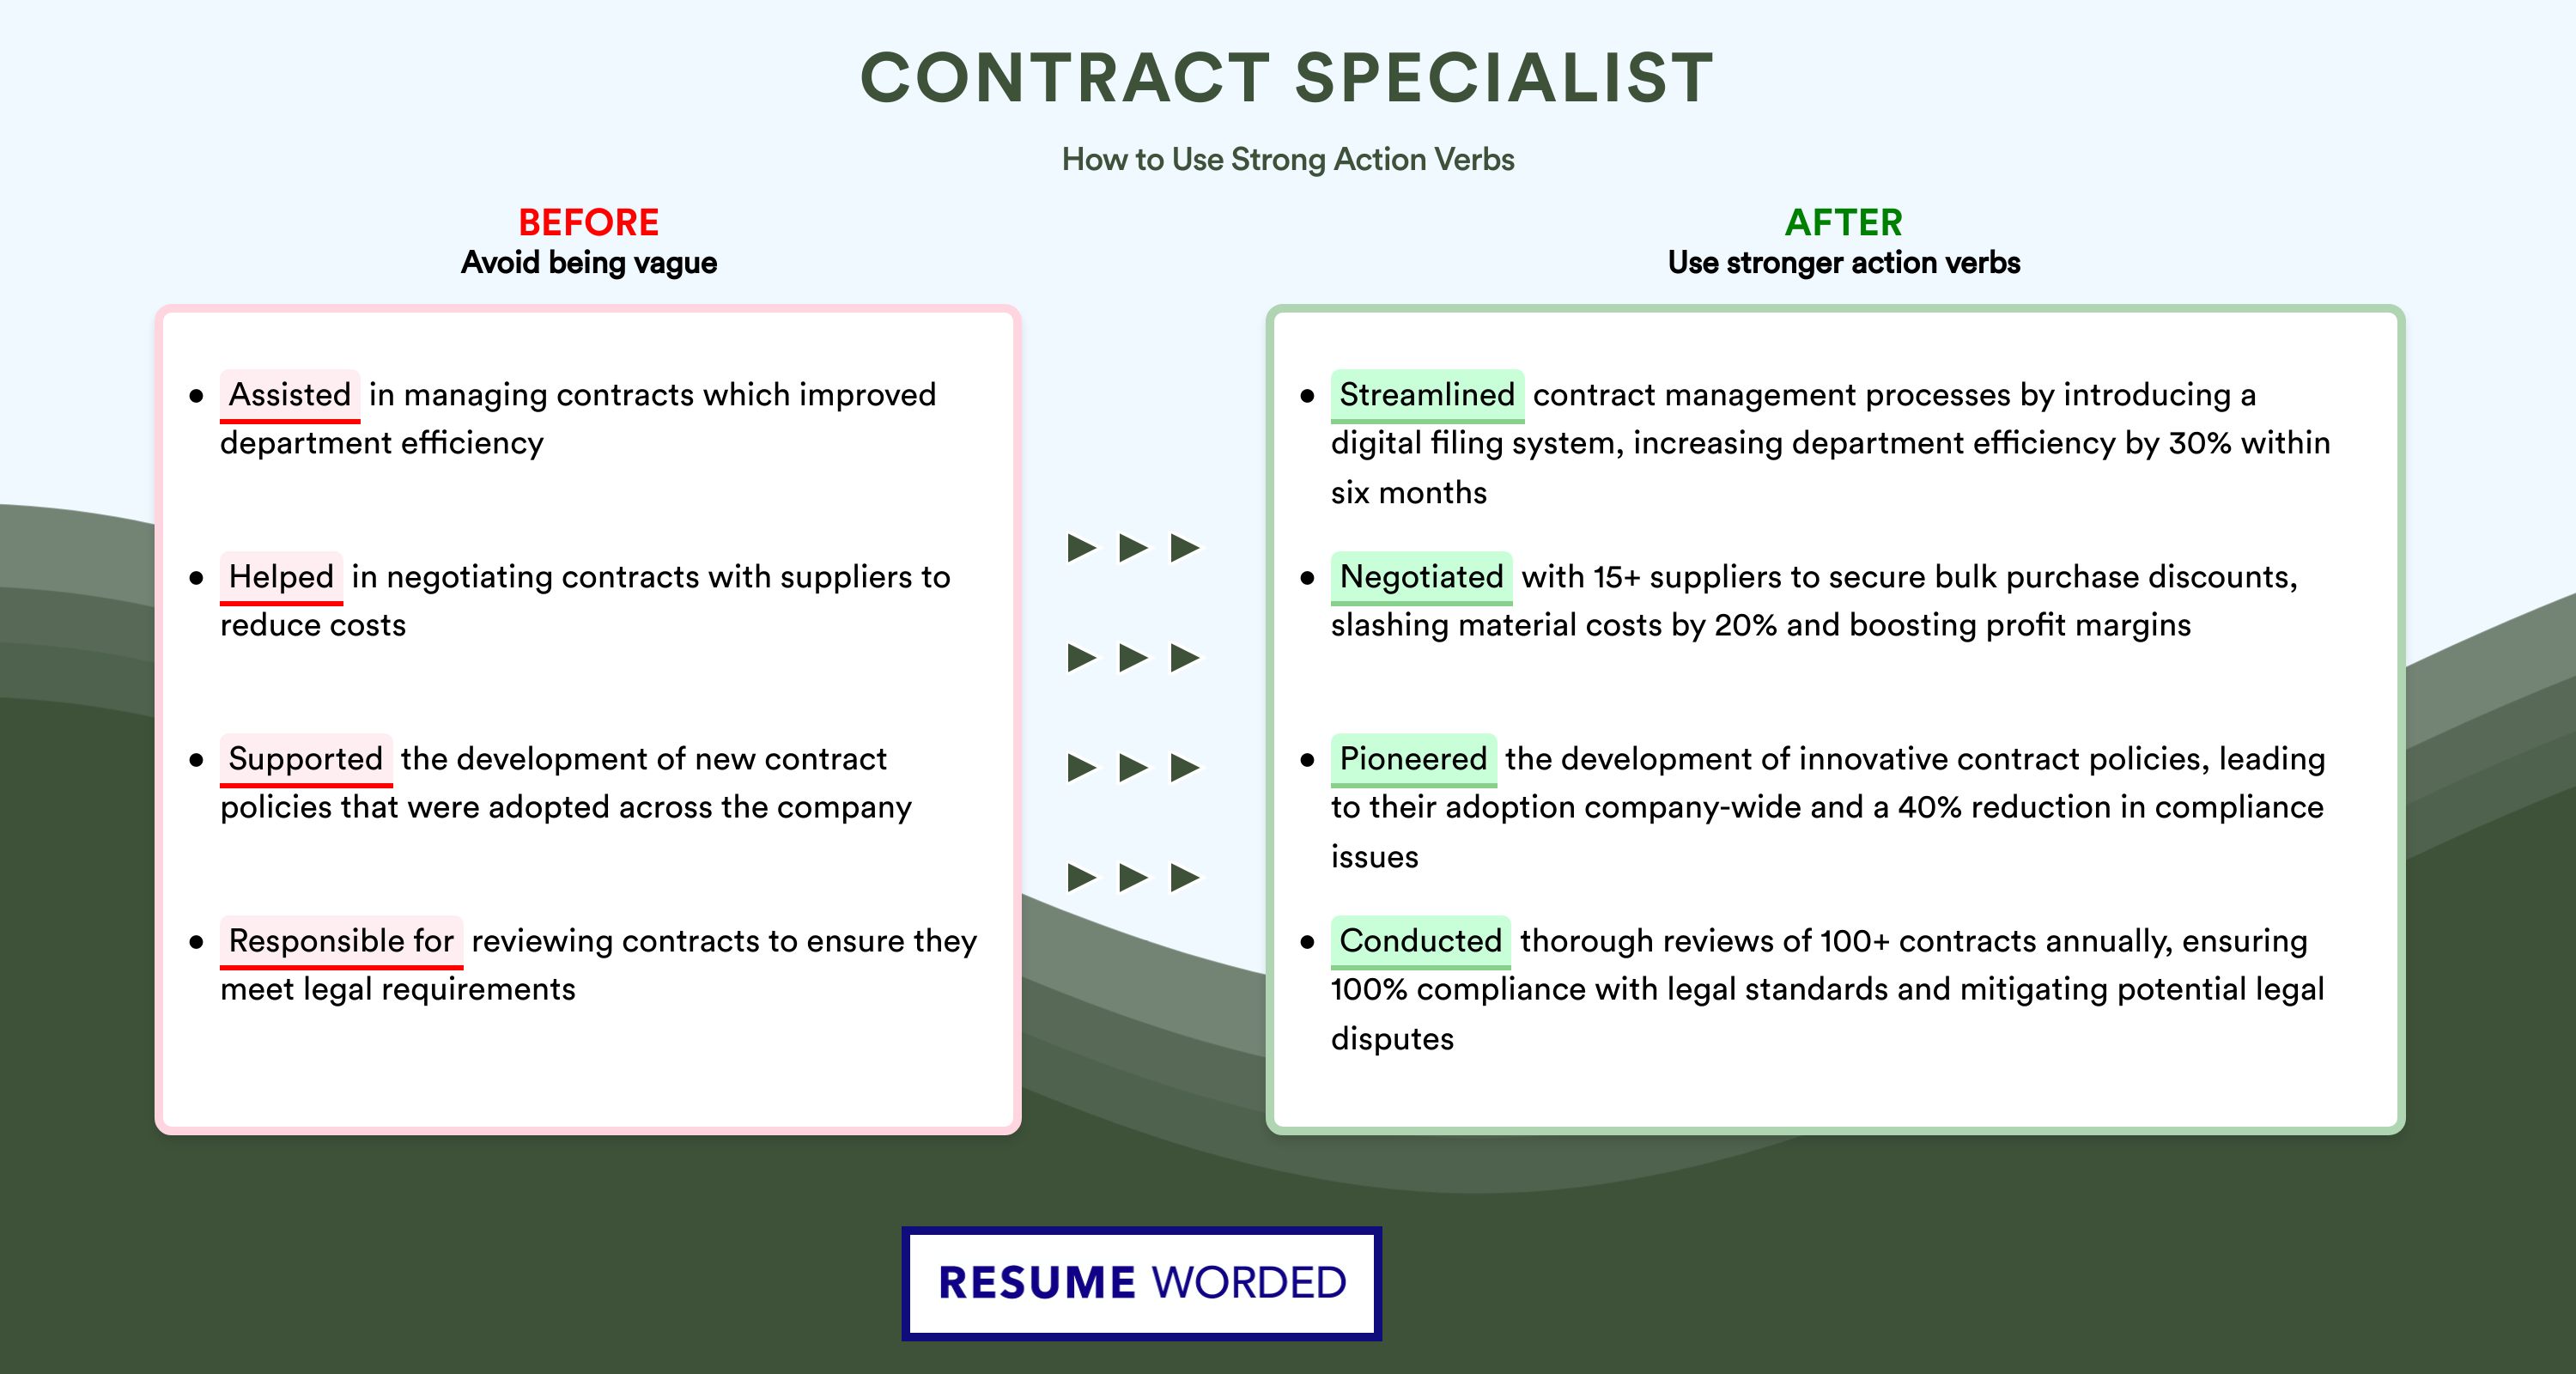 Action Verbs for Contract Specialist